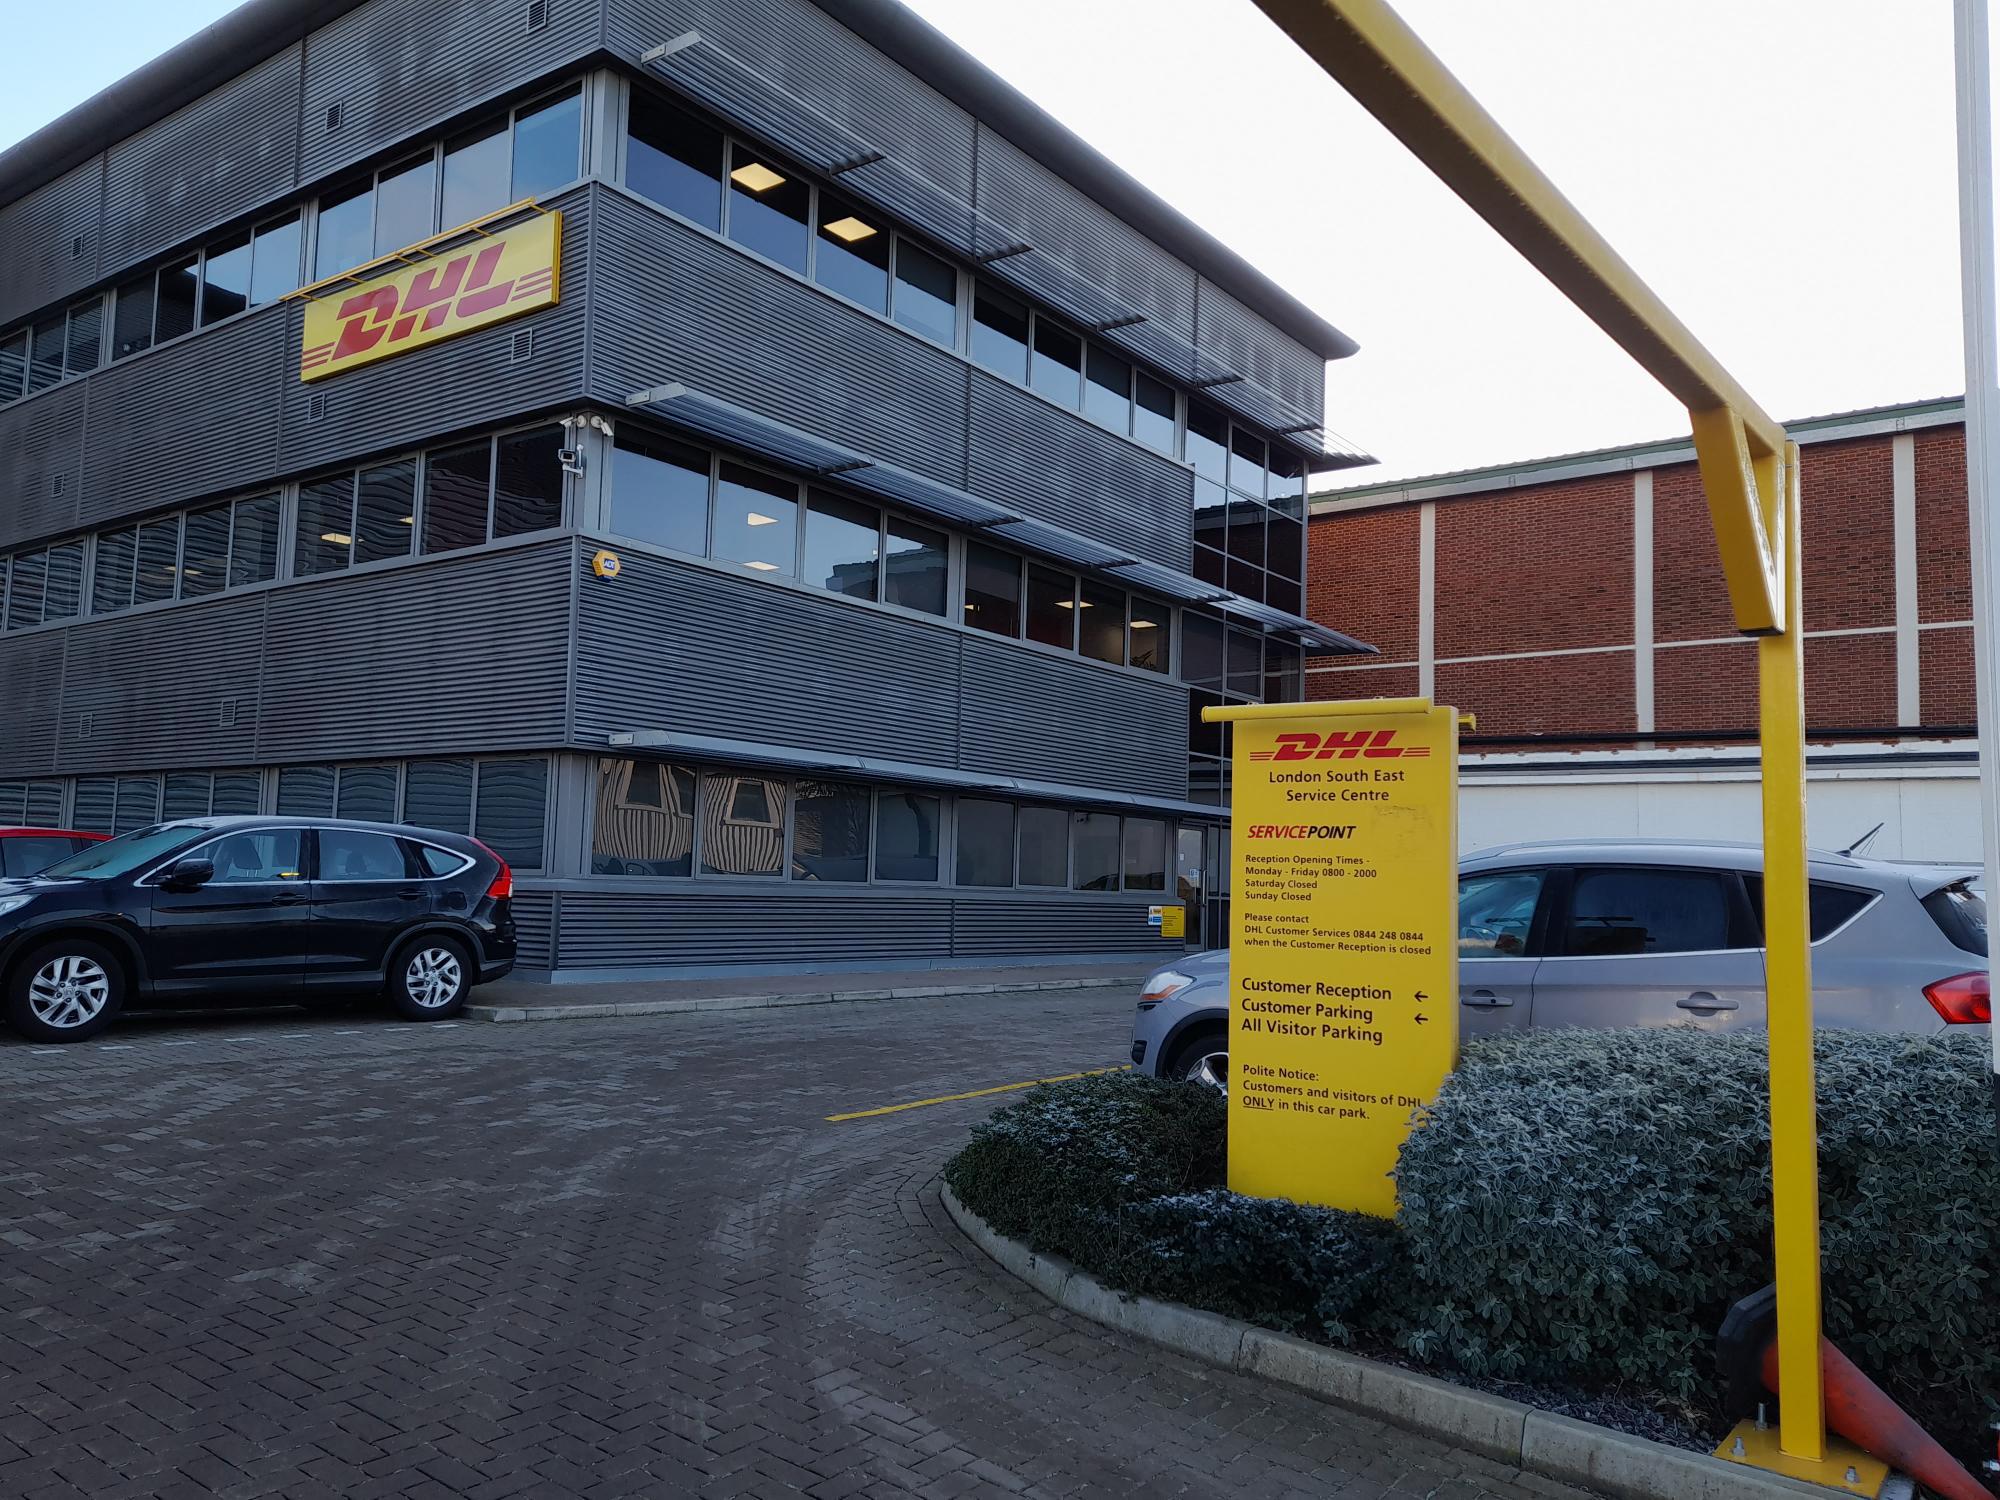 Images DHL Express London South East